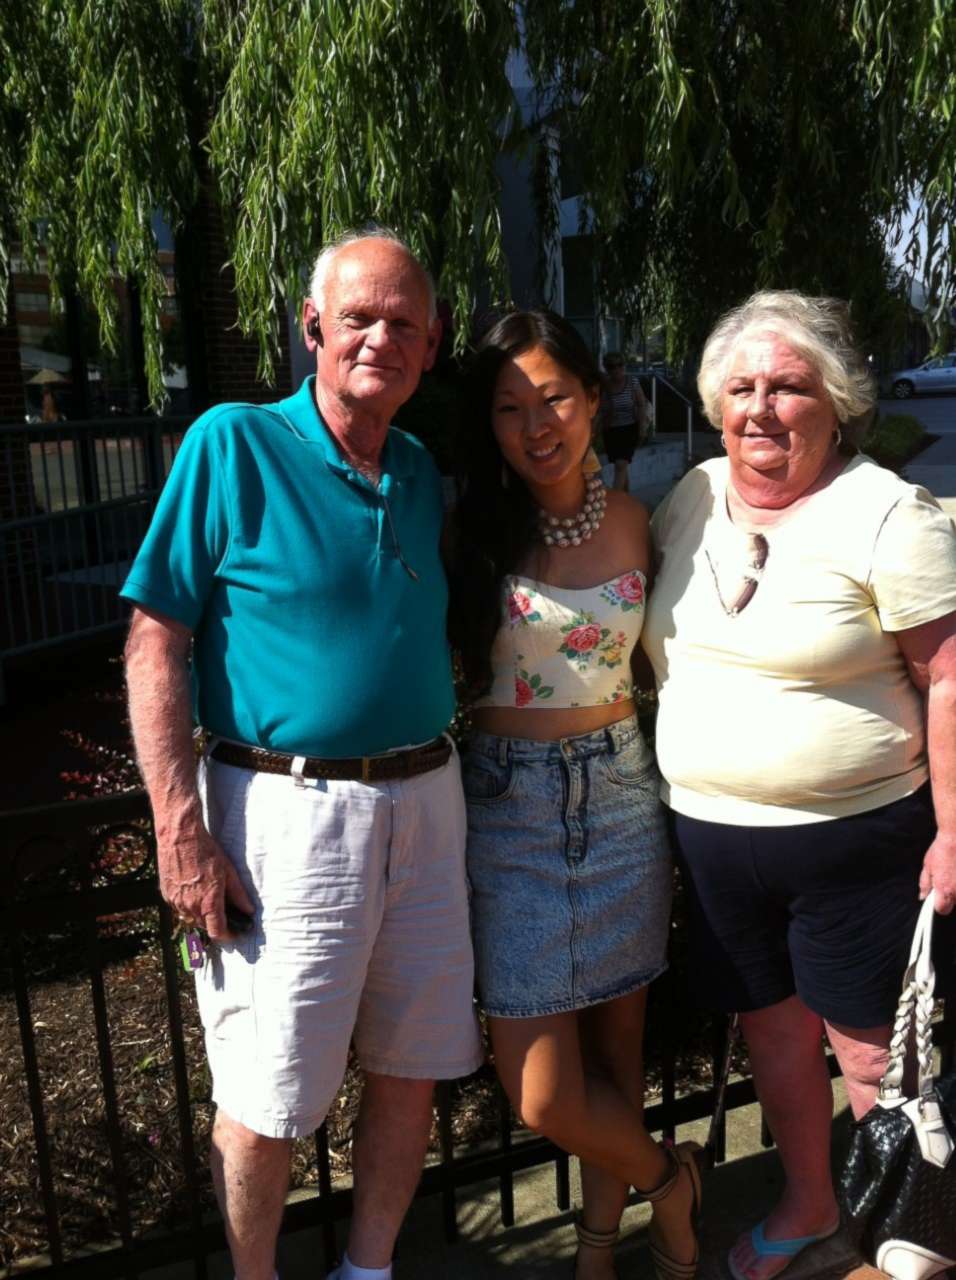 PHOTO: Caitlin Boston, center, poses with her parents Jim Boston and Nancy Boston.